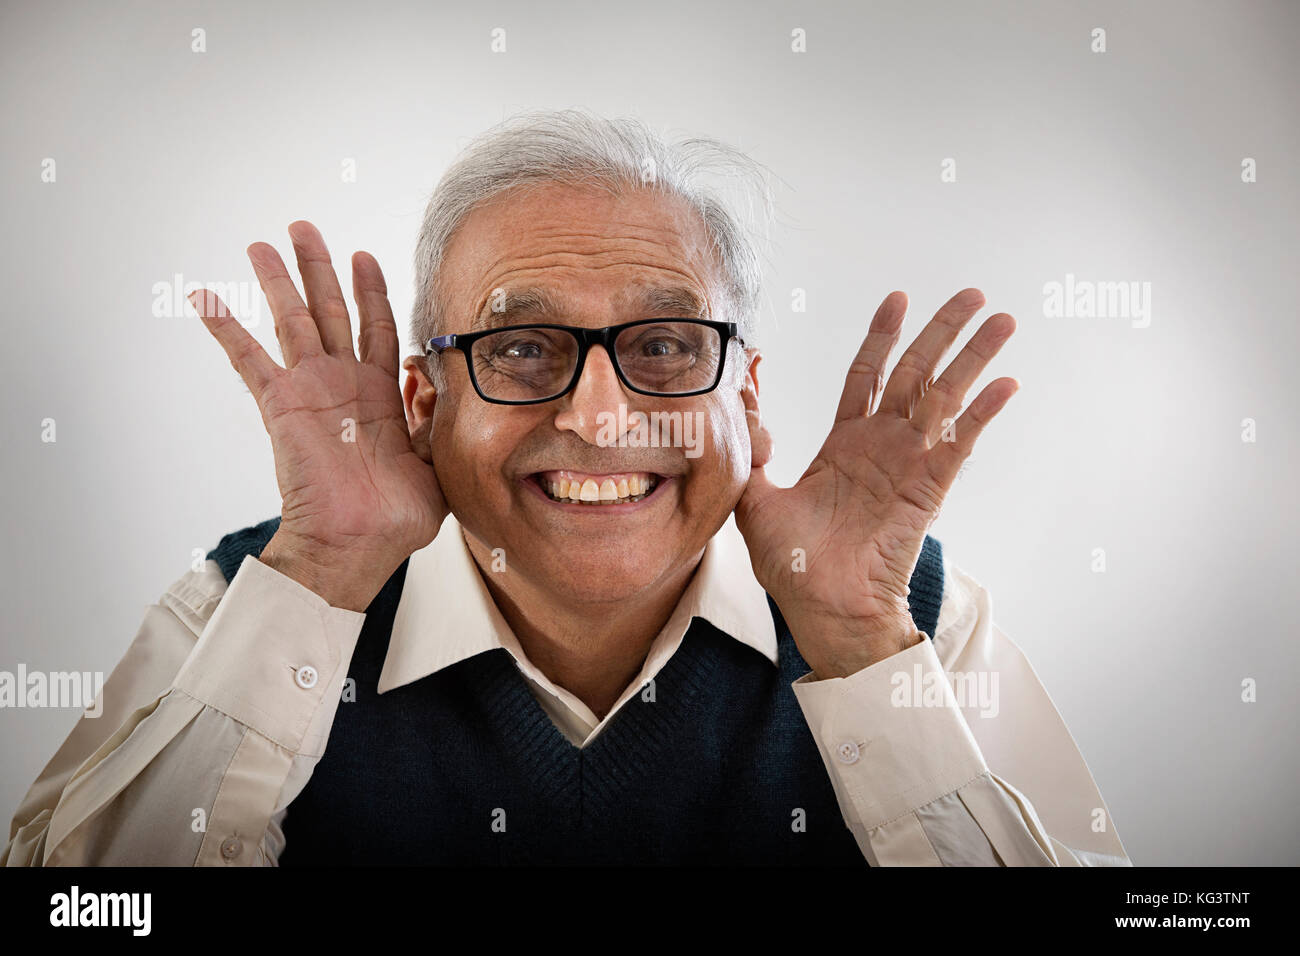 Senior man making funny face with hands in his ears Stock Photo